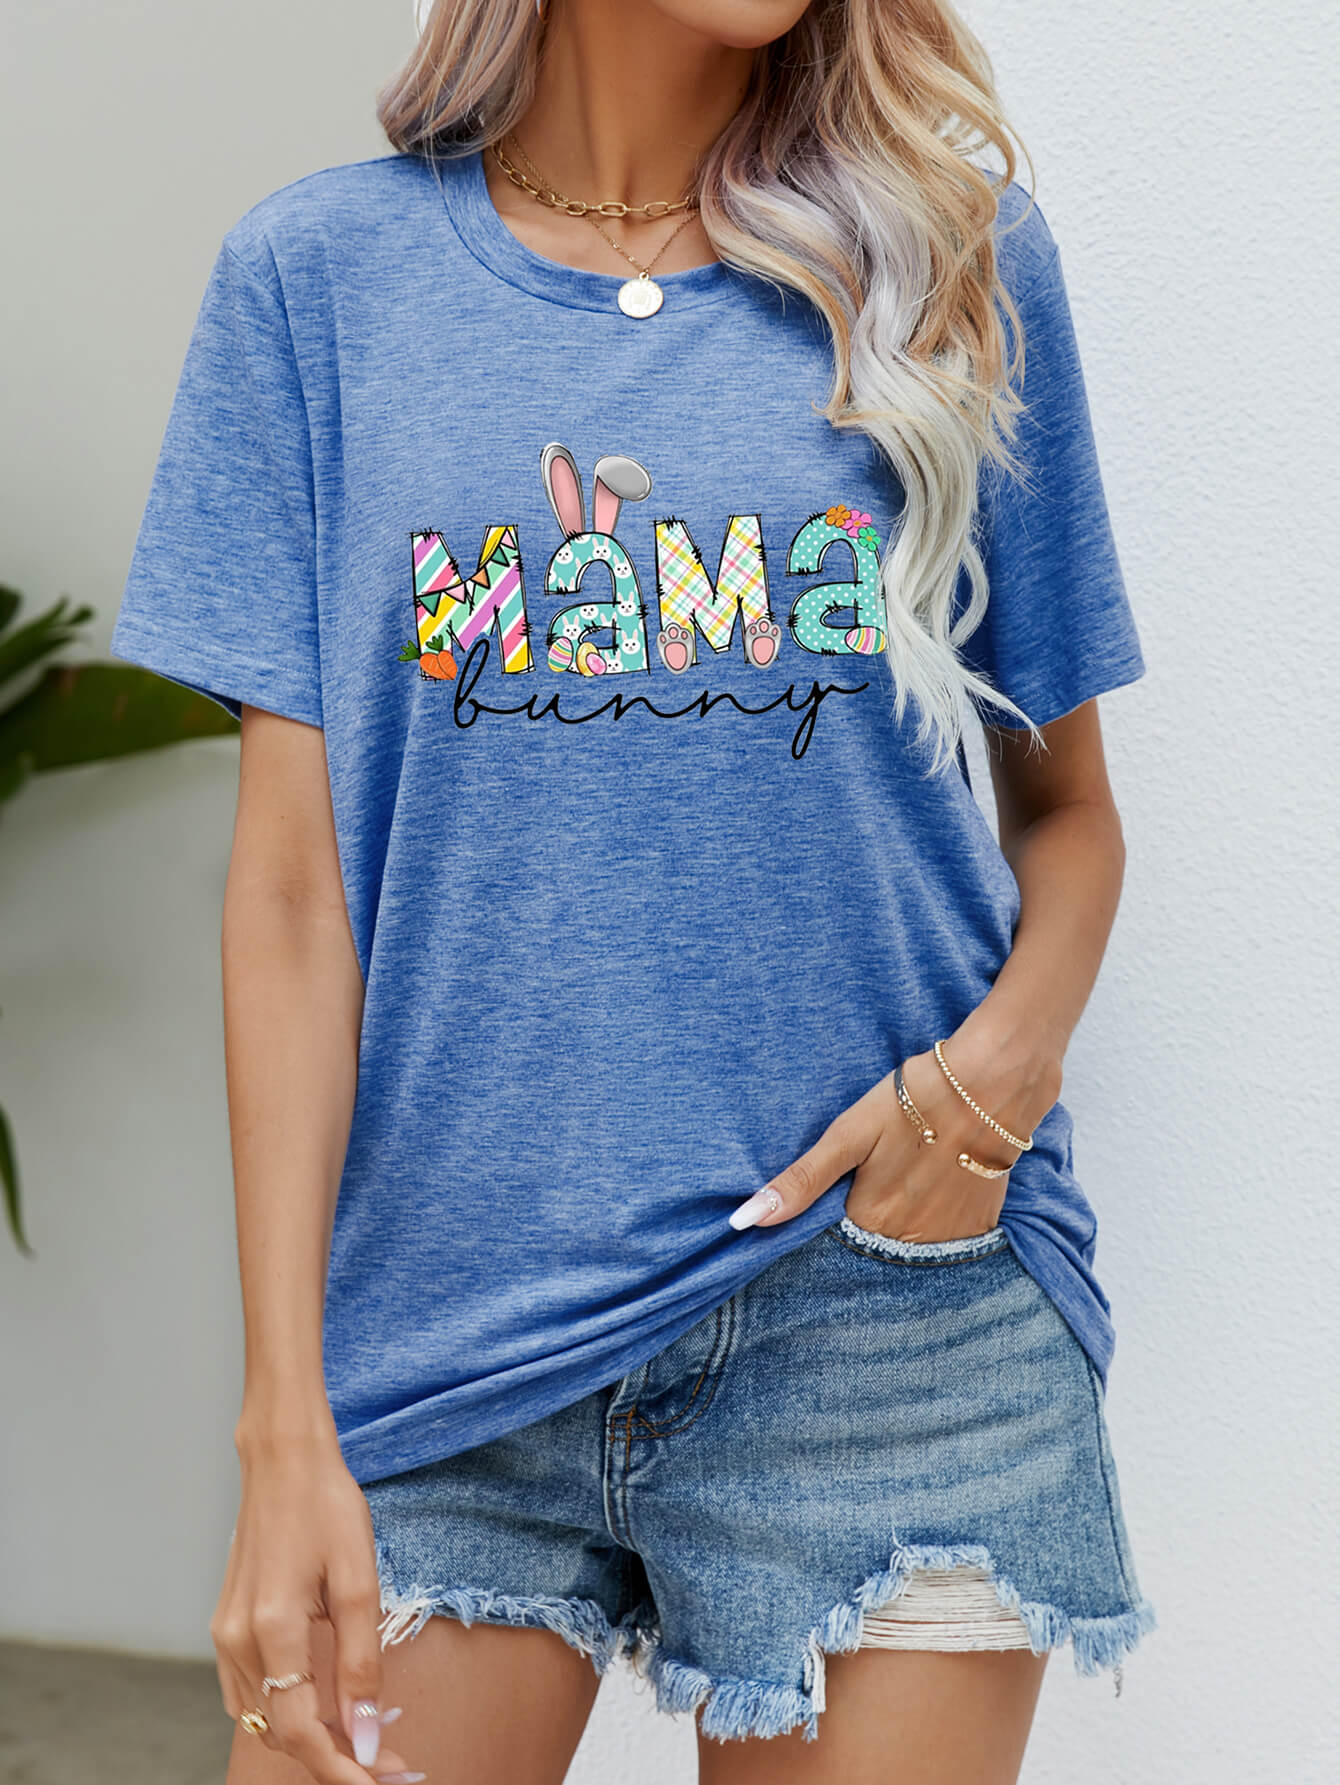 MAMA BUNNY Easter Graphic Tee (6 Colors)  Krazy Heart Designs Boutique Cobalt Blue S 